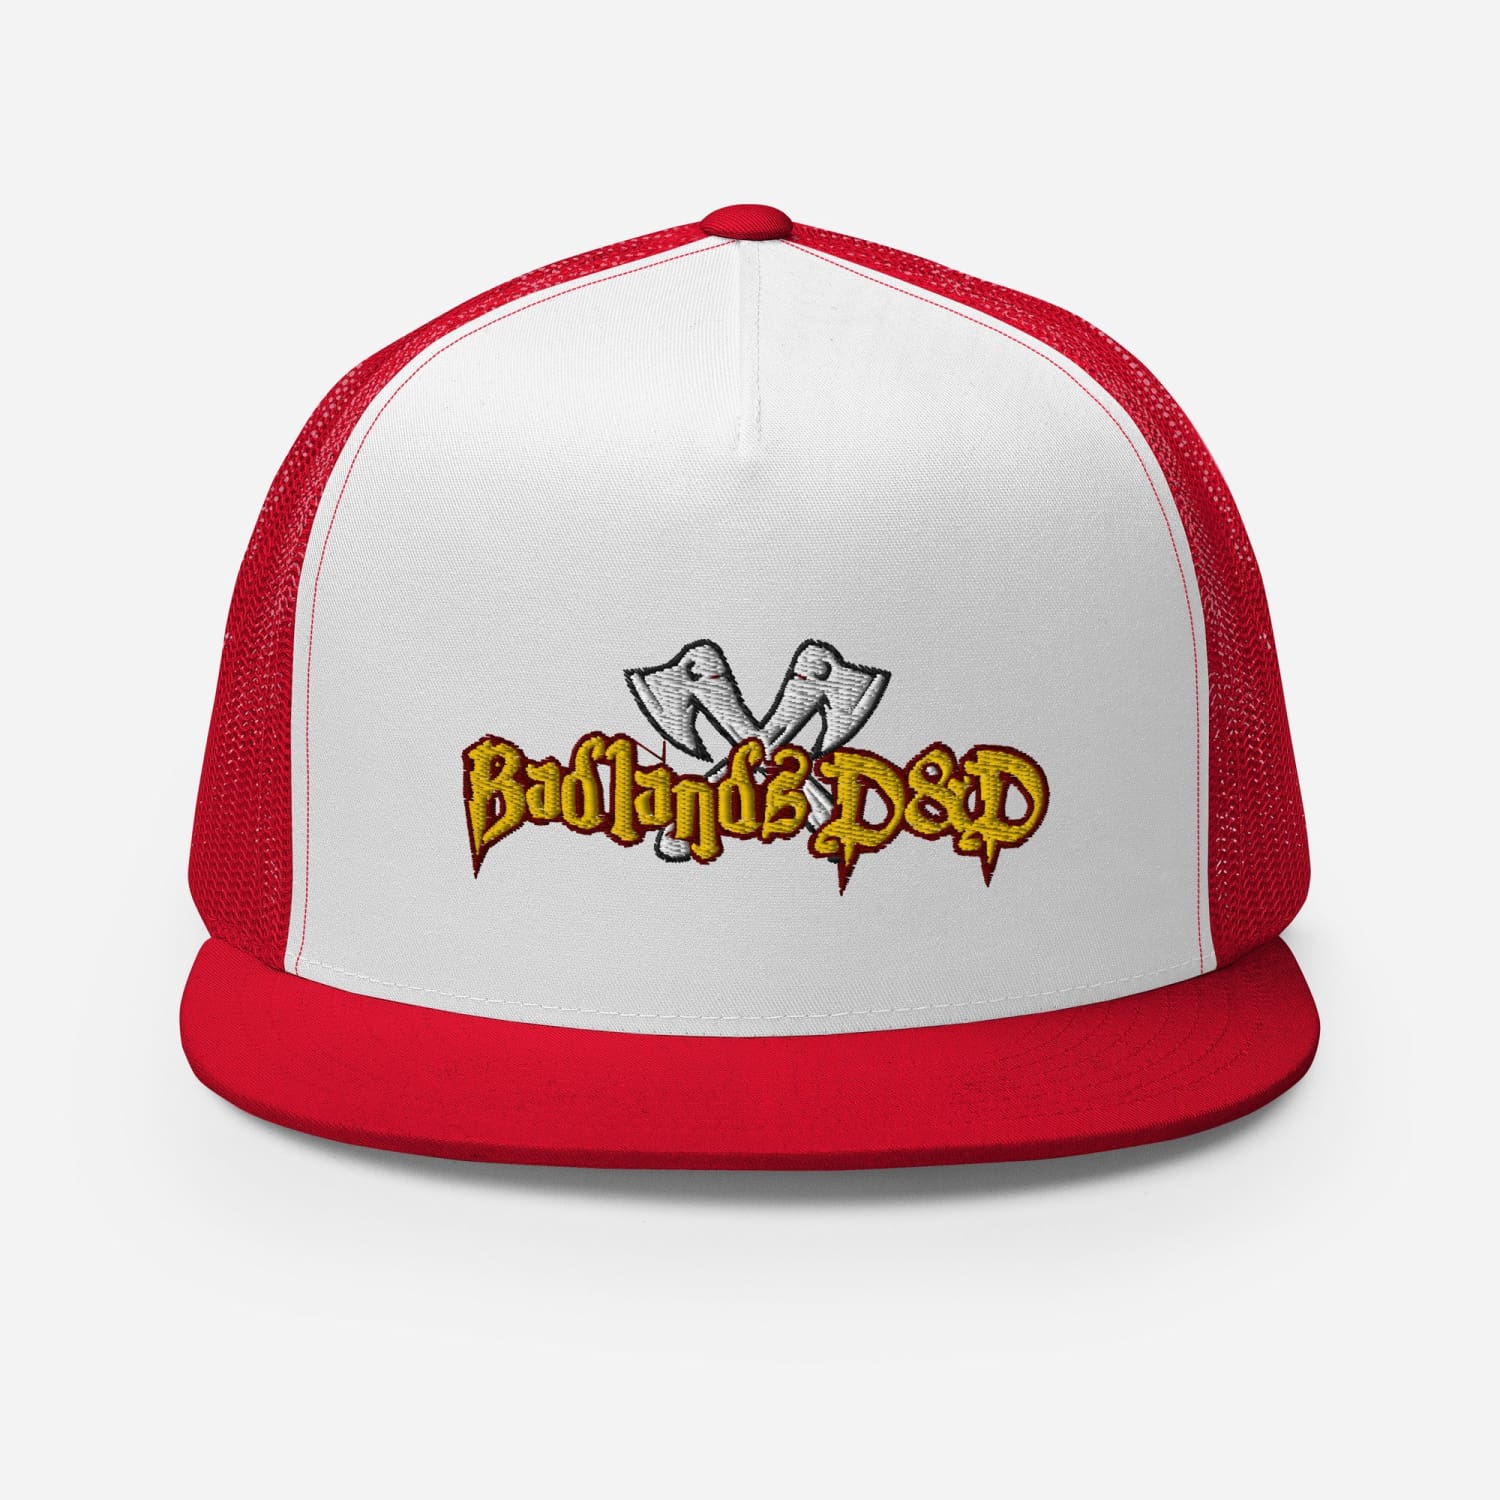 Badlands D&D Logo Classic Trucker Cap - Red/ White/ Red